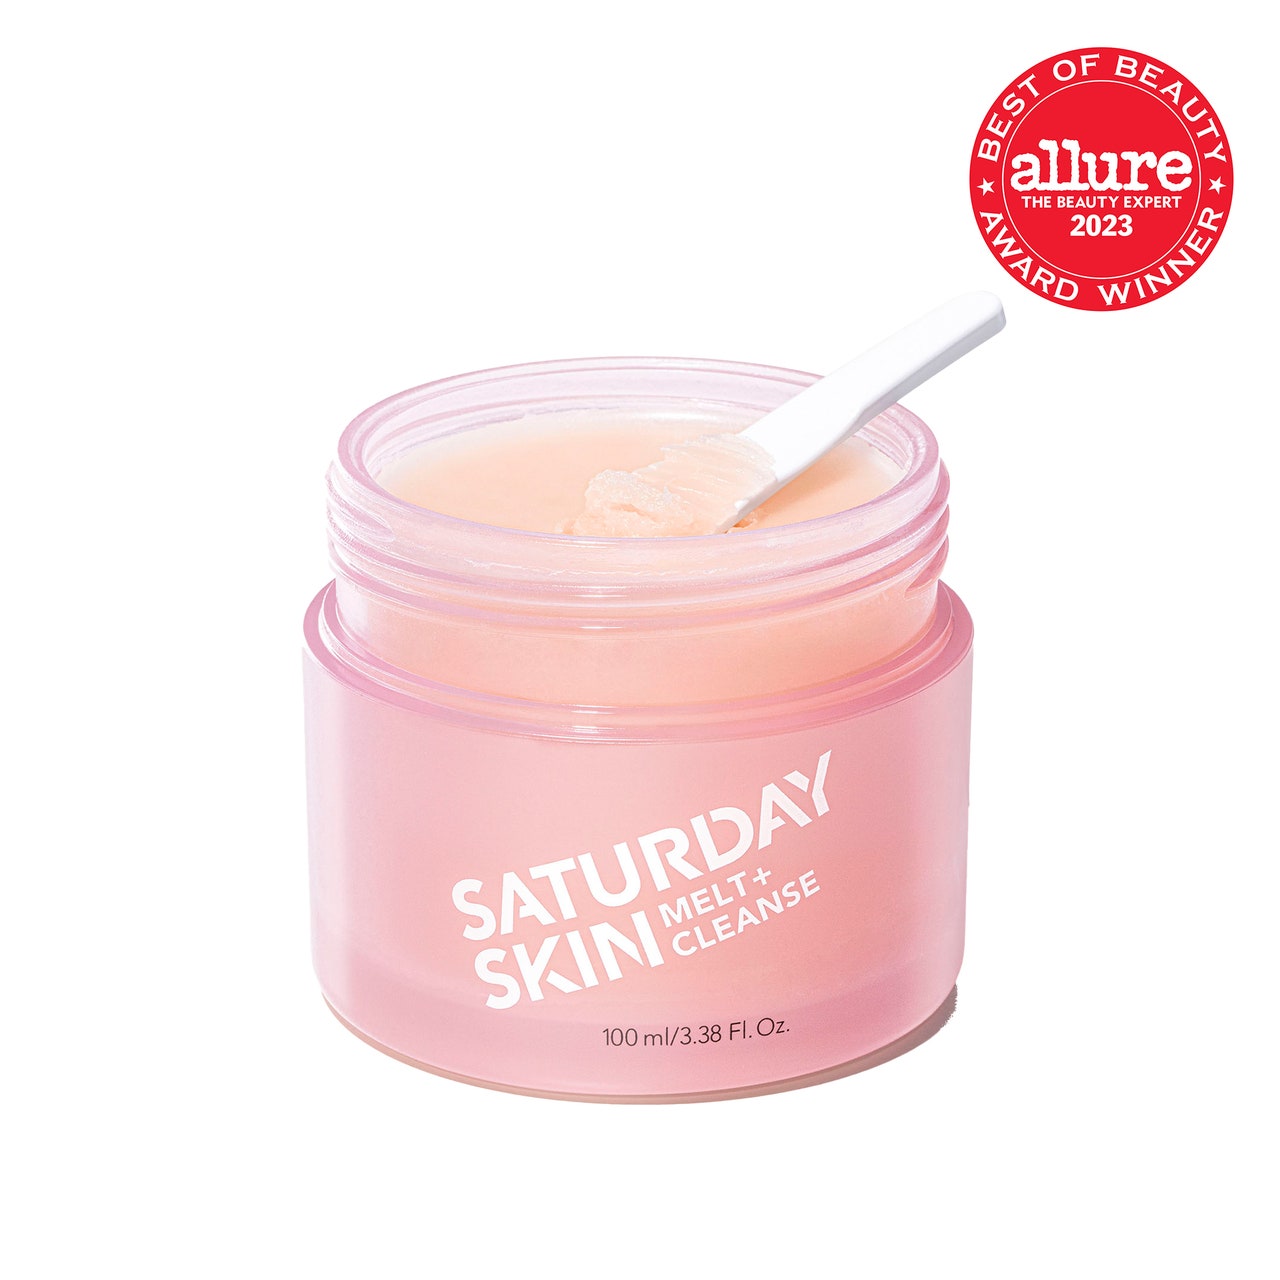 Saturday Skin Melt + Cleanse Makeup Melting Balm pink jar of pink cleansing balm with a white spoon in it on white background with red Allure BoB seal in the top right corner